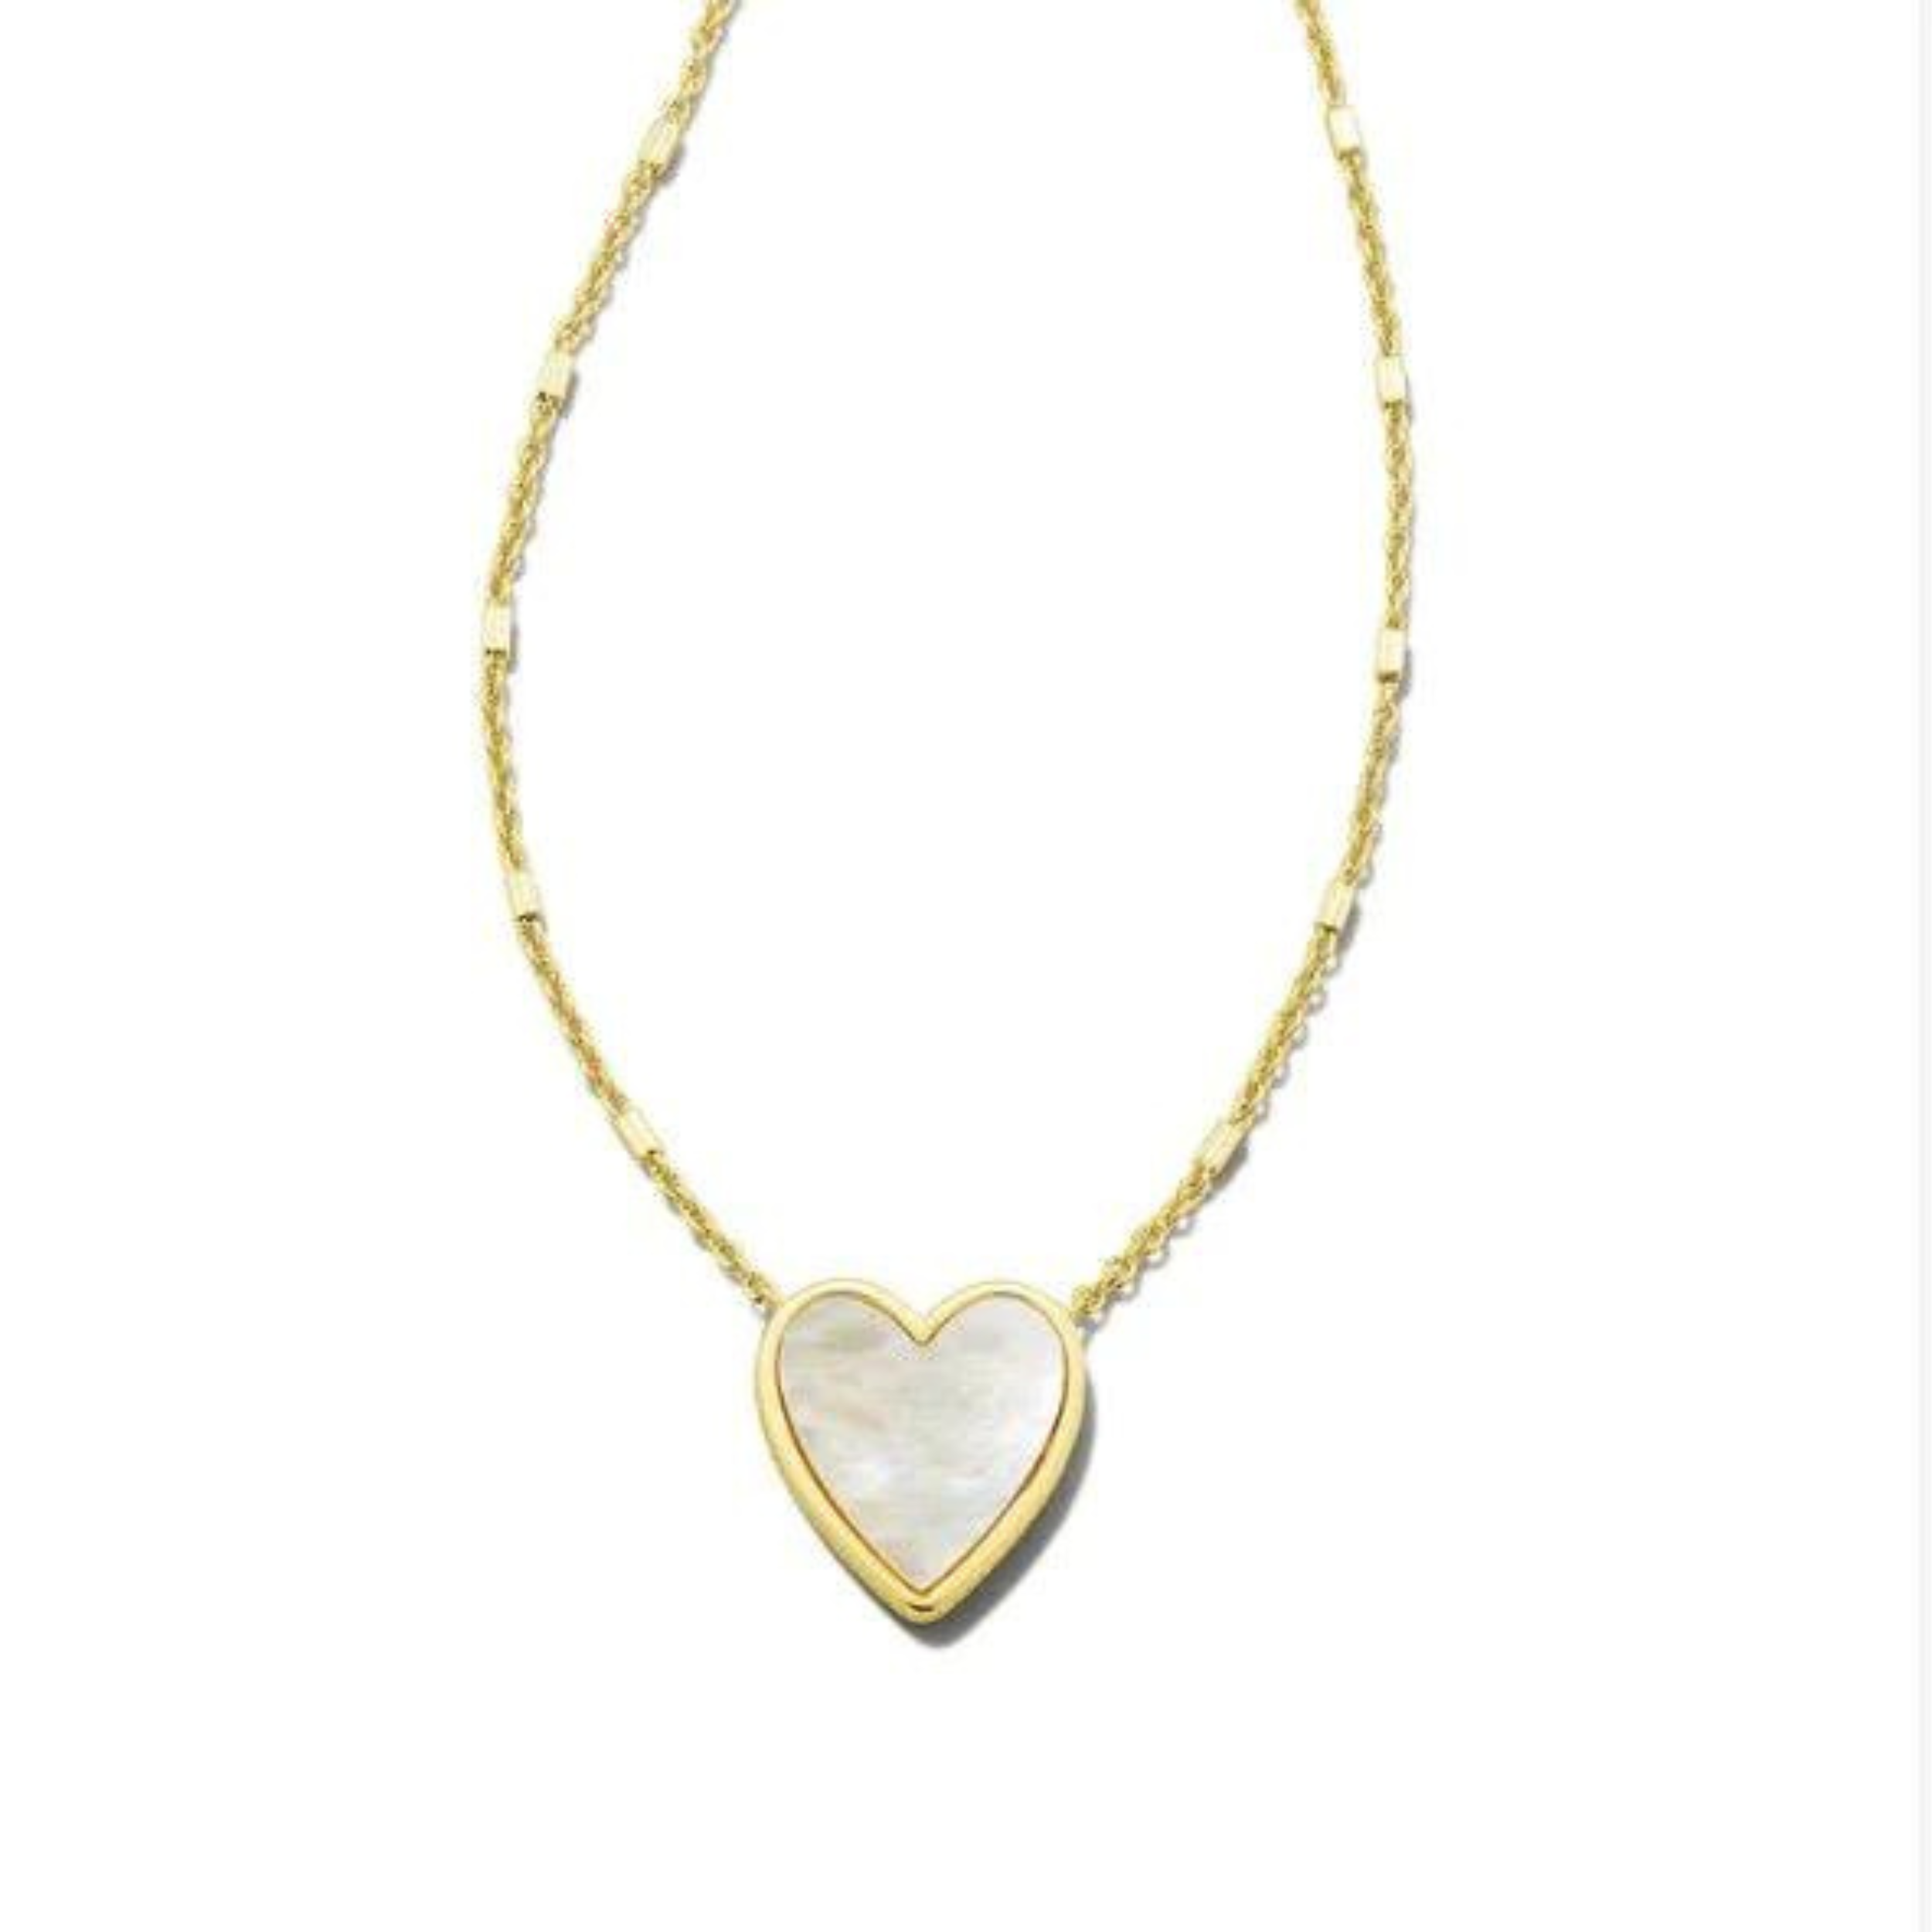 Gold heart necklace with ivory mother of pearl stone, pictured on a white background.